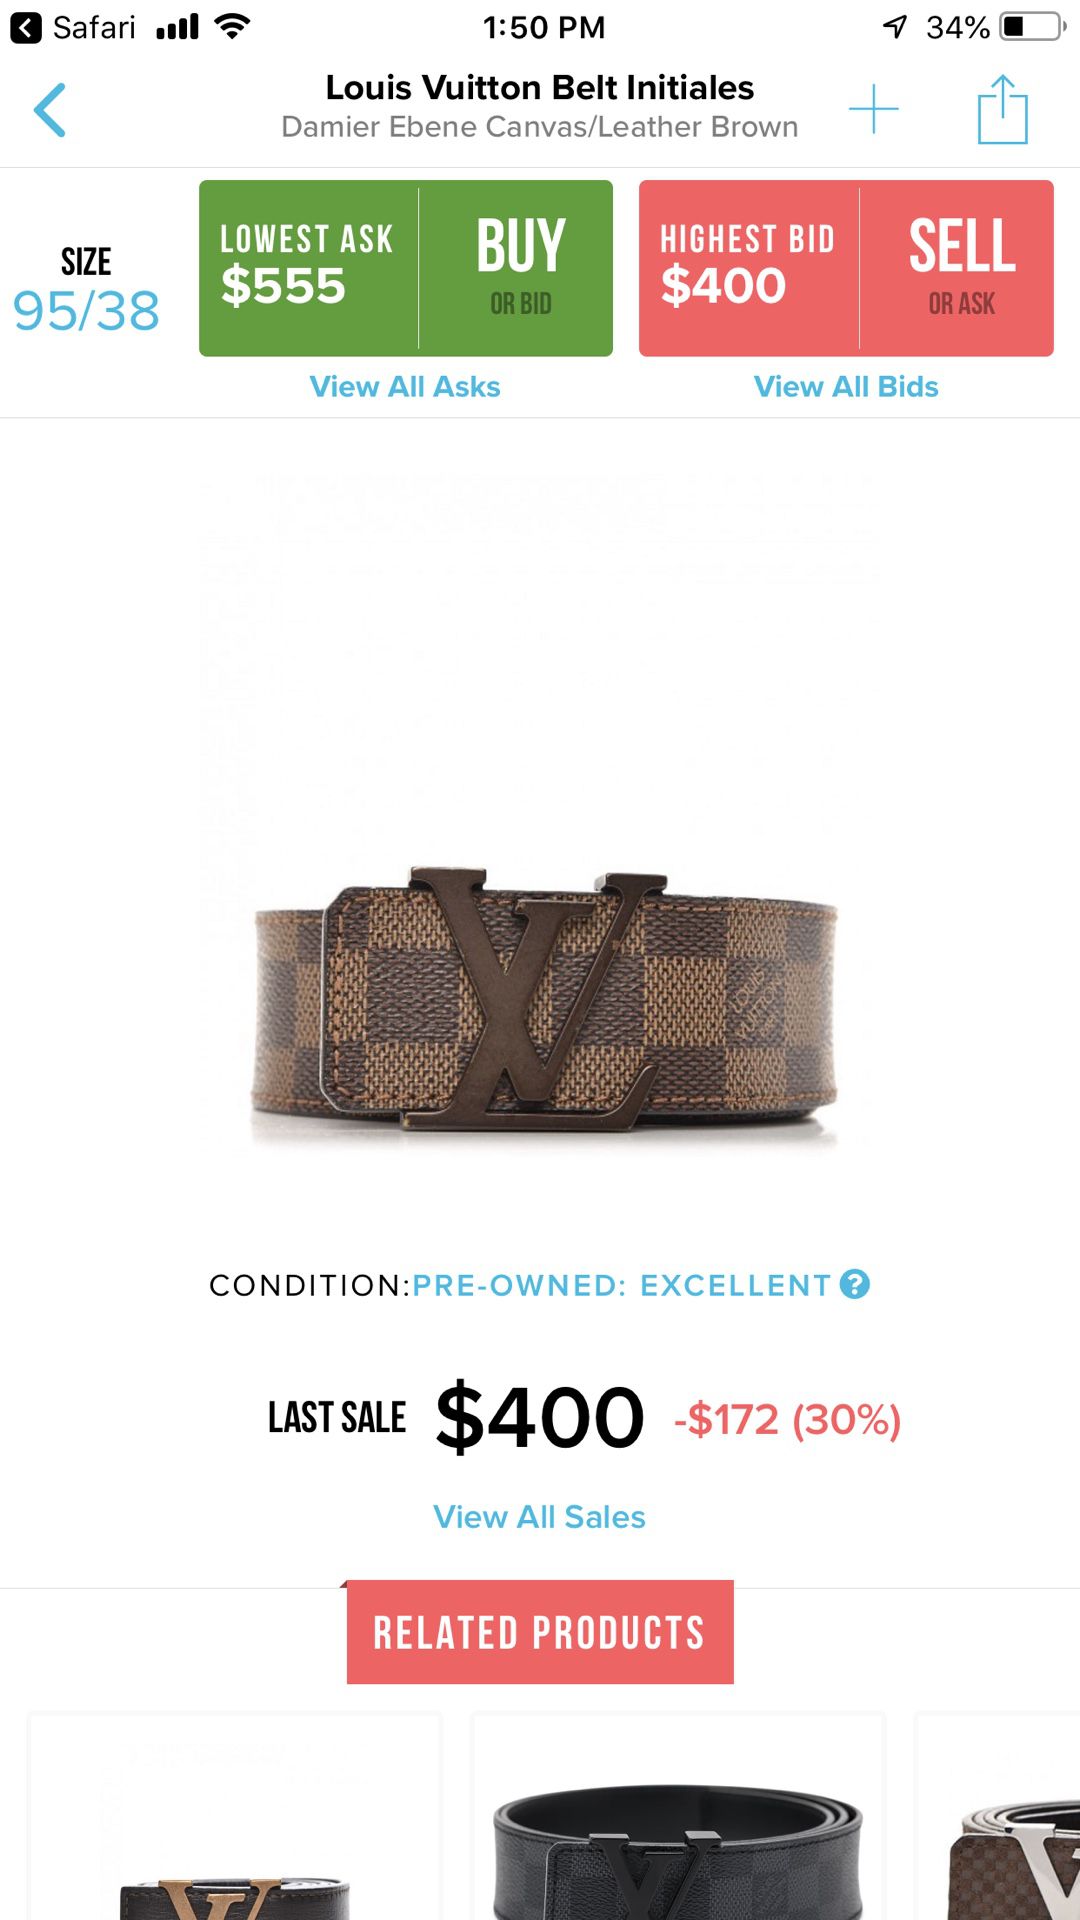 Lv damier belt size 110 Louis Vuitton for Sale in The Bronx, NY - OfferUp